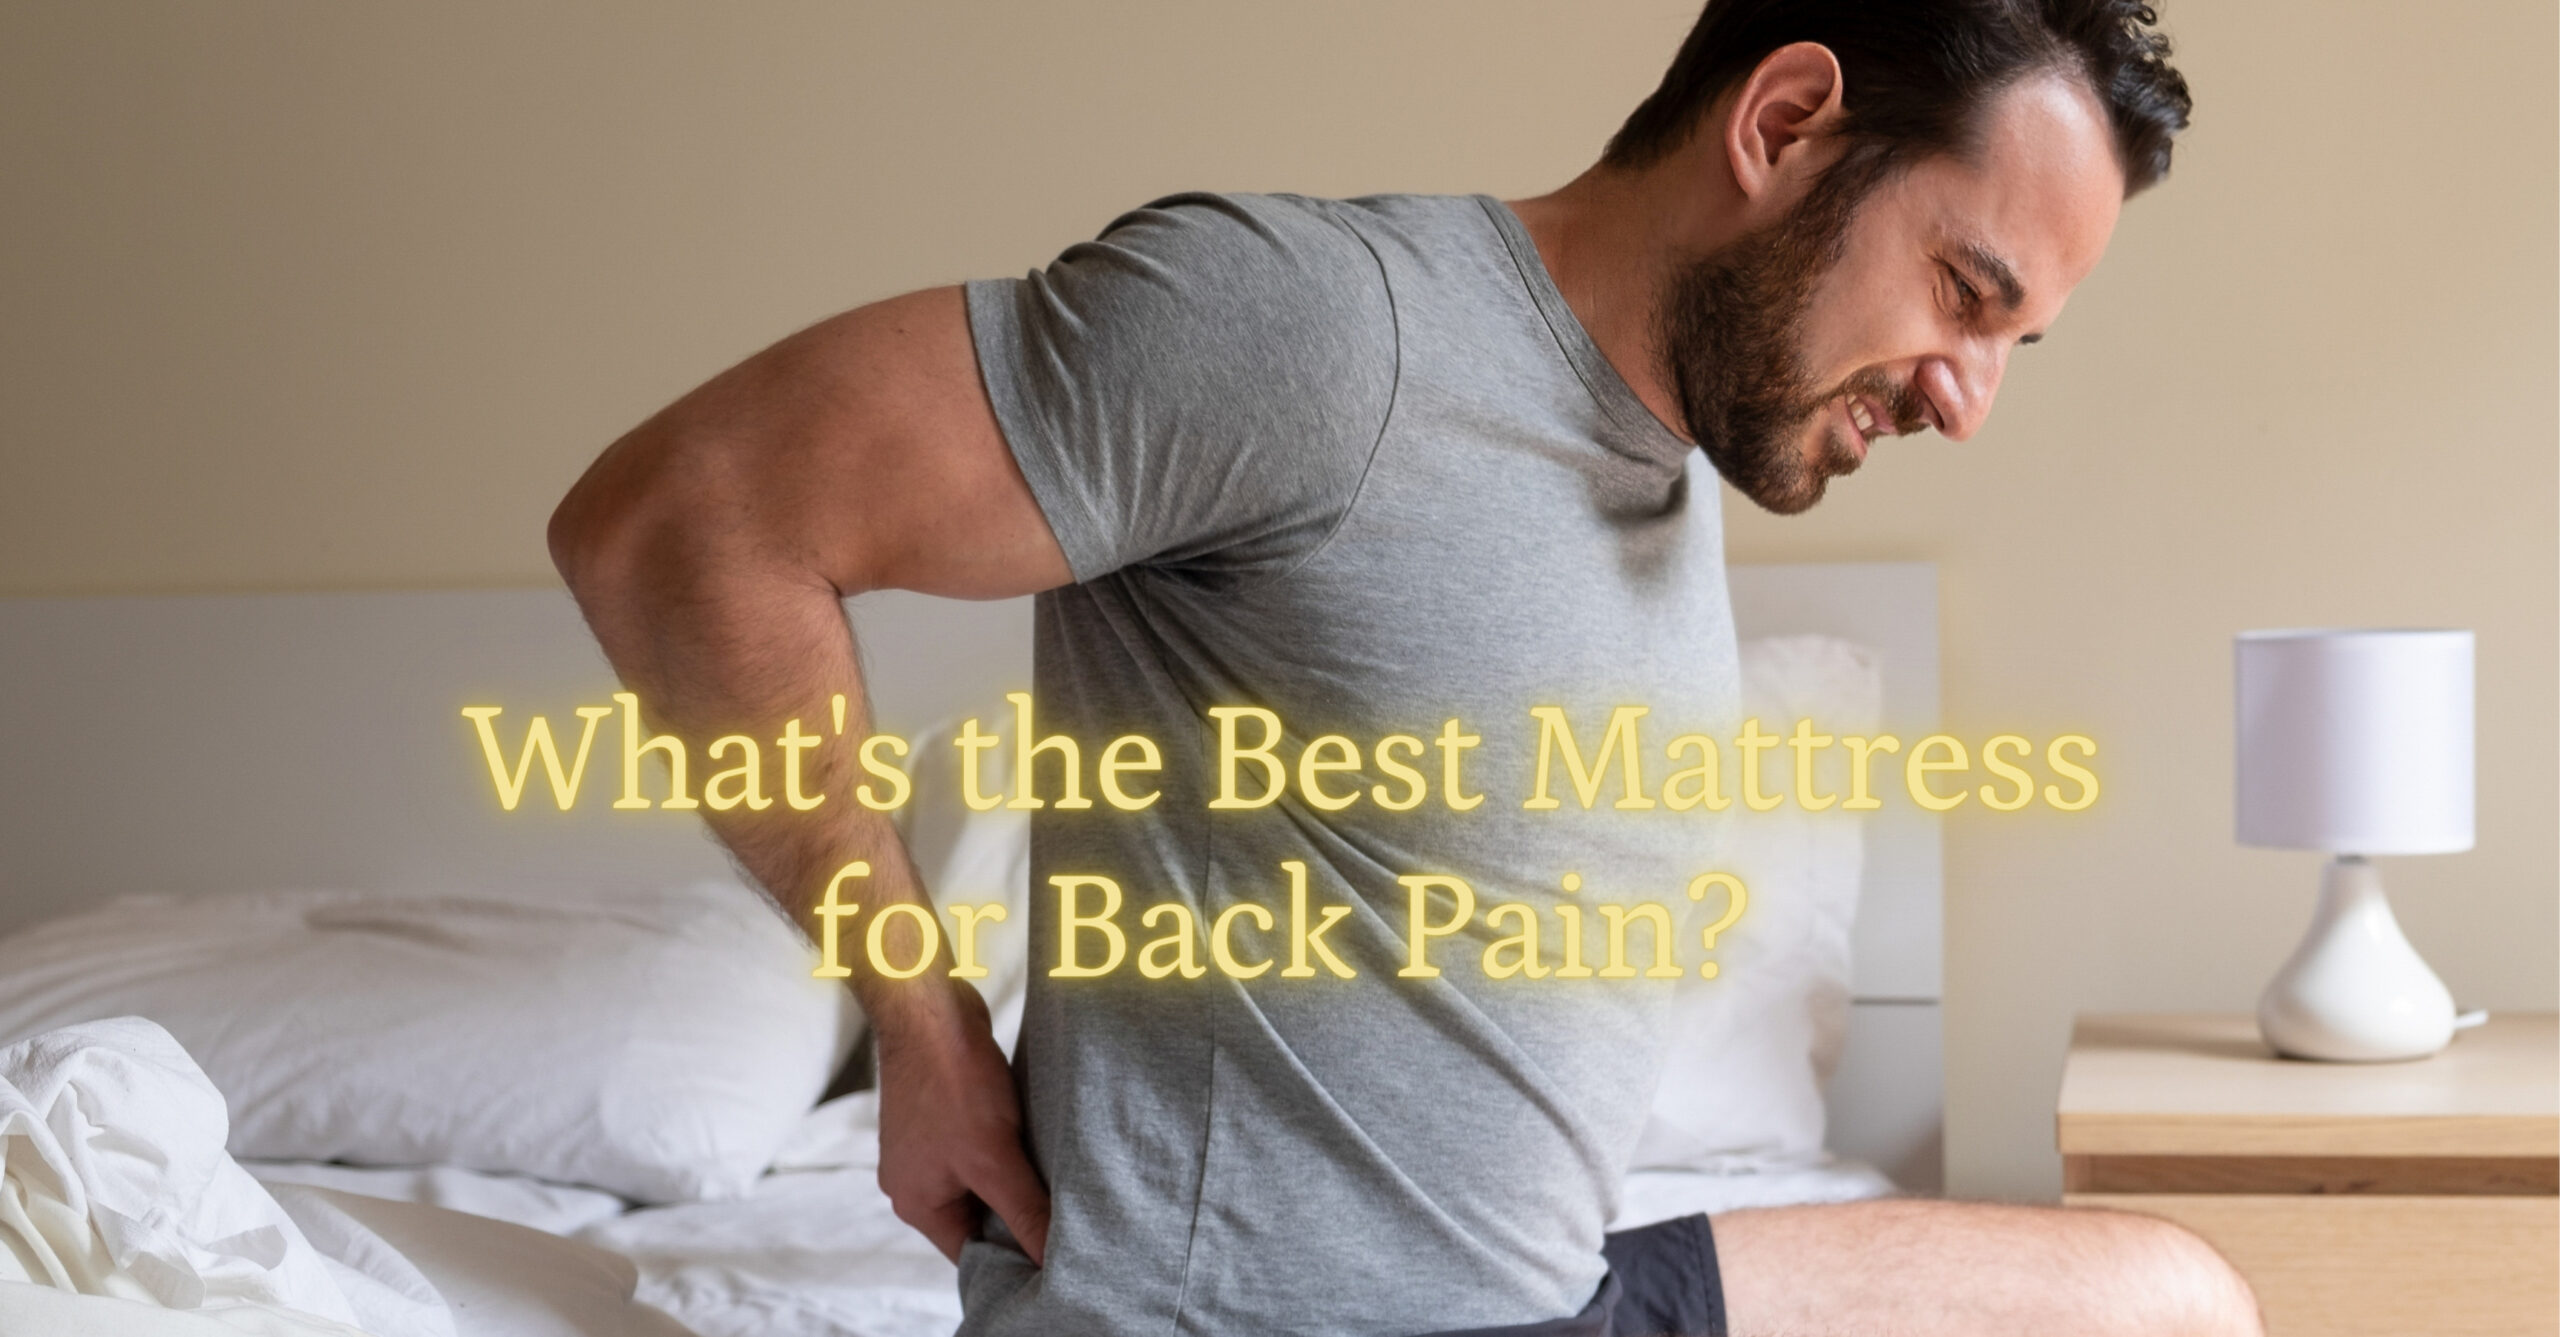 What’s the Best Mattress for Back Pain? 4